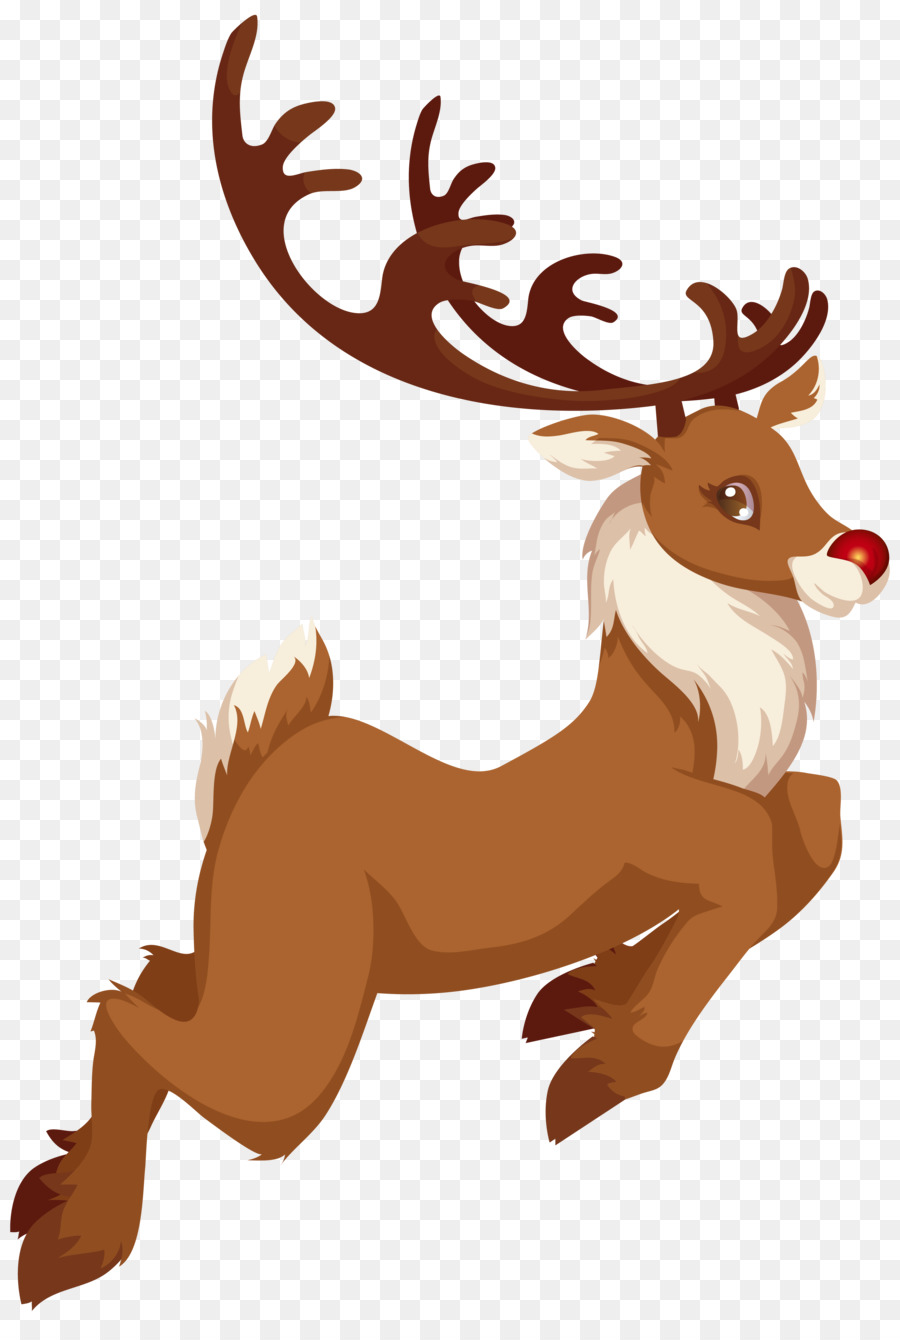 Rudolph Santa Claus Reindeer Clip art - Christmas Cliparts Rudolph png download - 4230*6234 - Free Transparent Rudolph png Download.